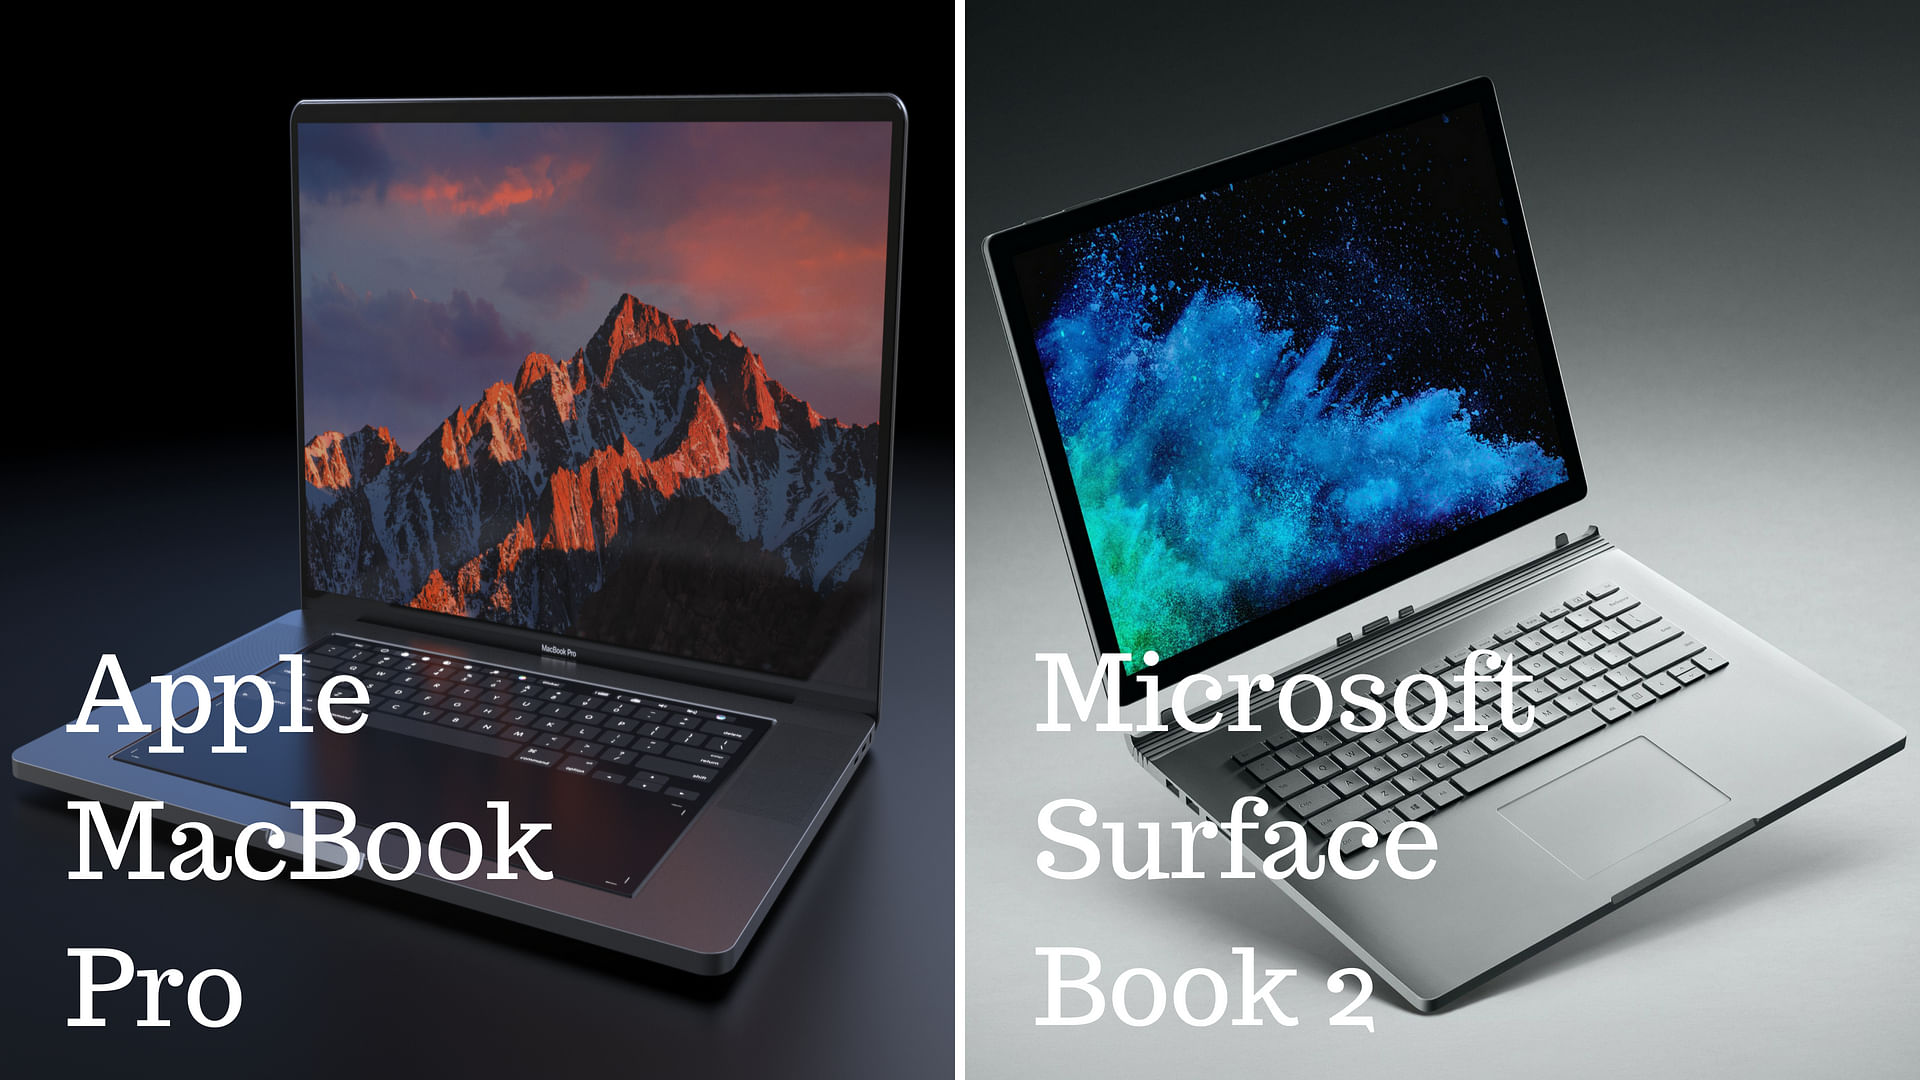 Apple MacBook Pro (left) and Microsoft Surface Book 2 (right)